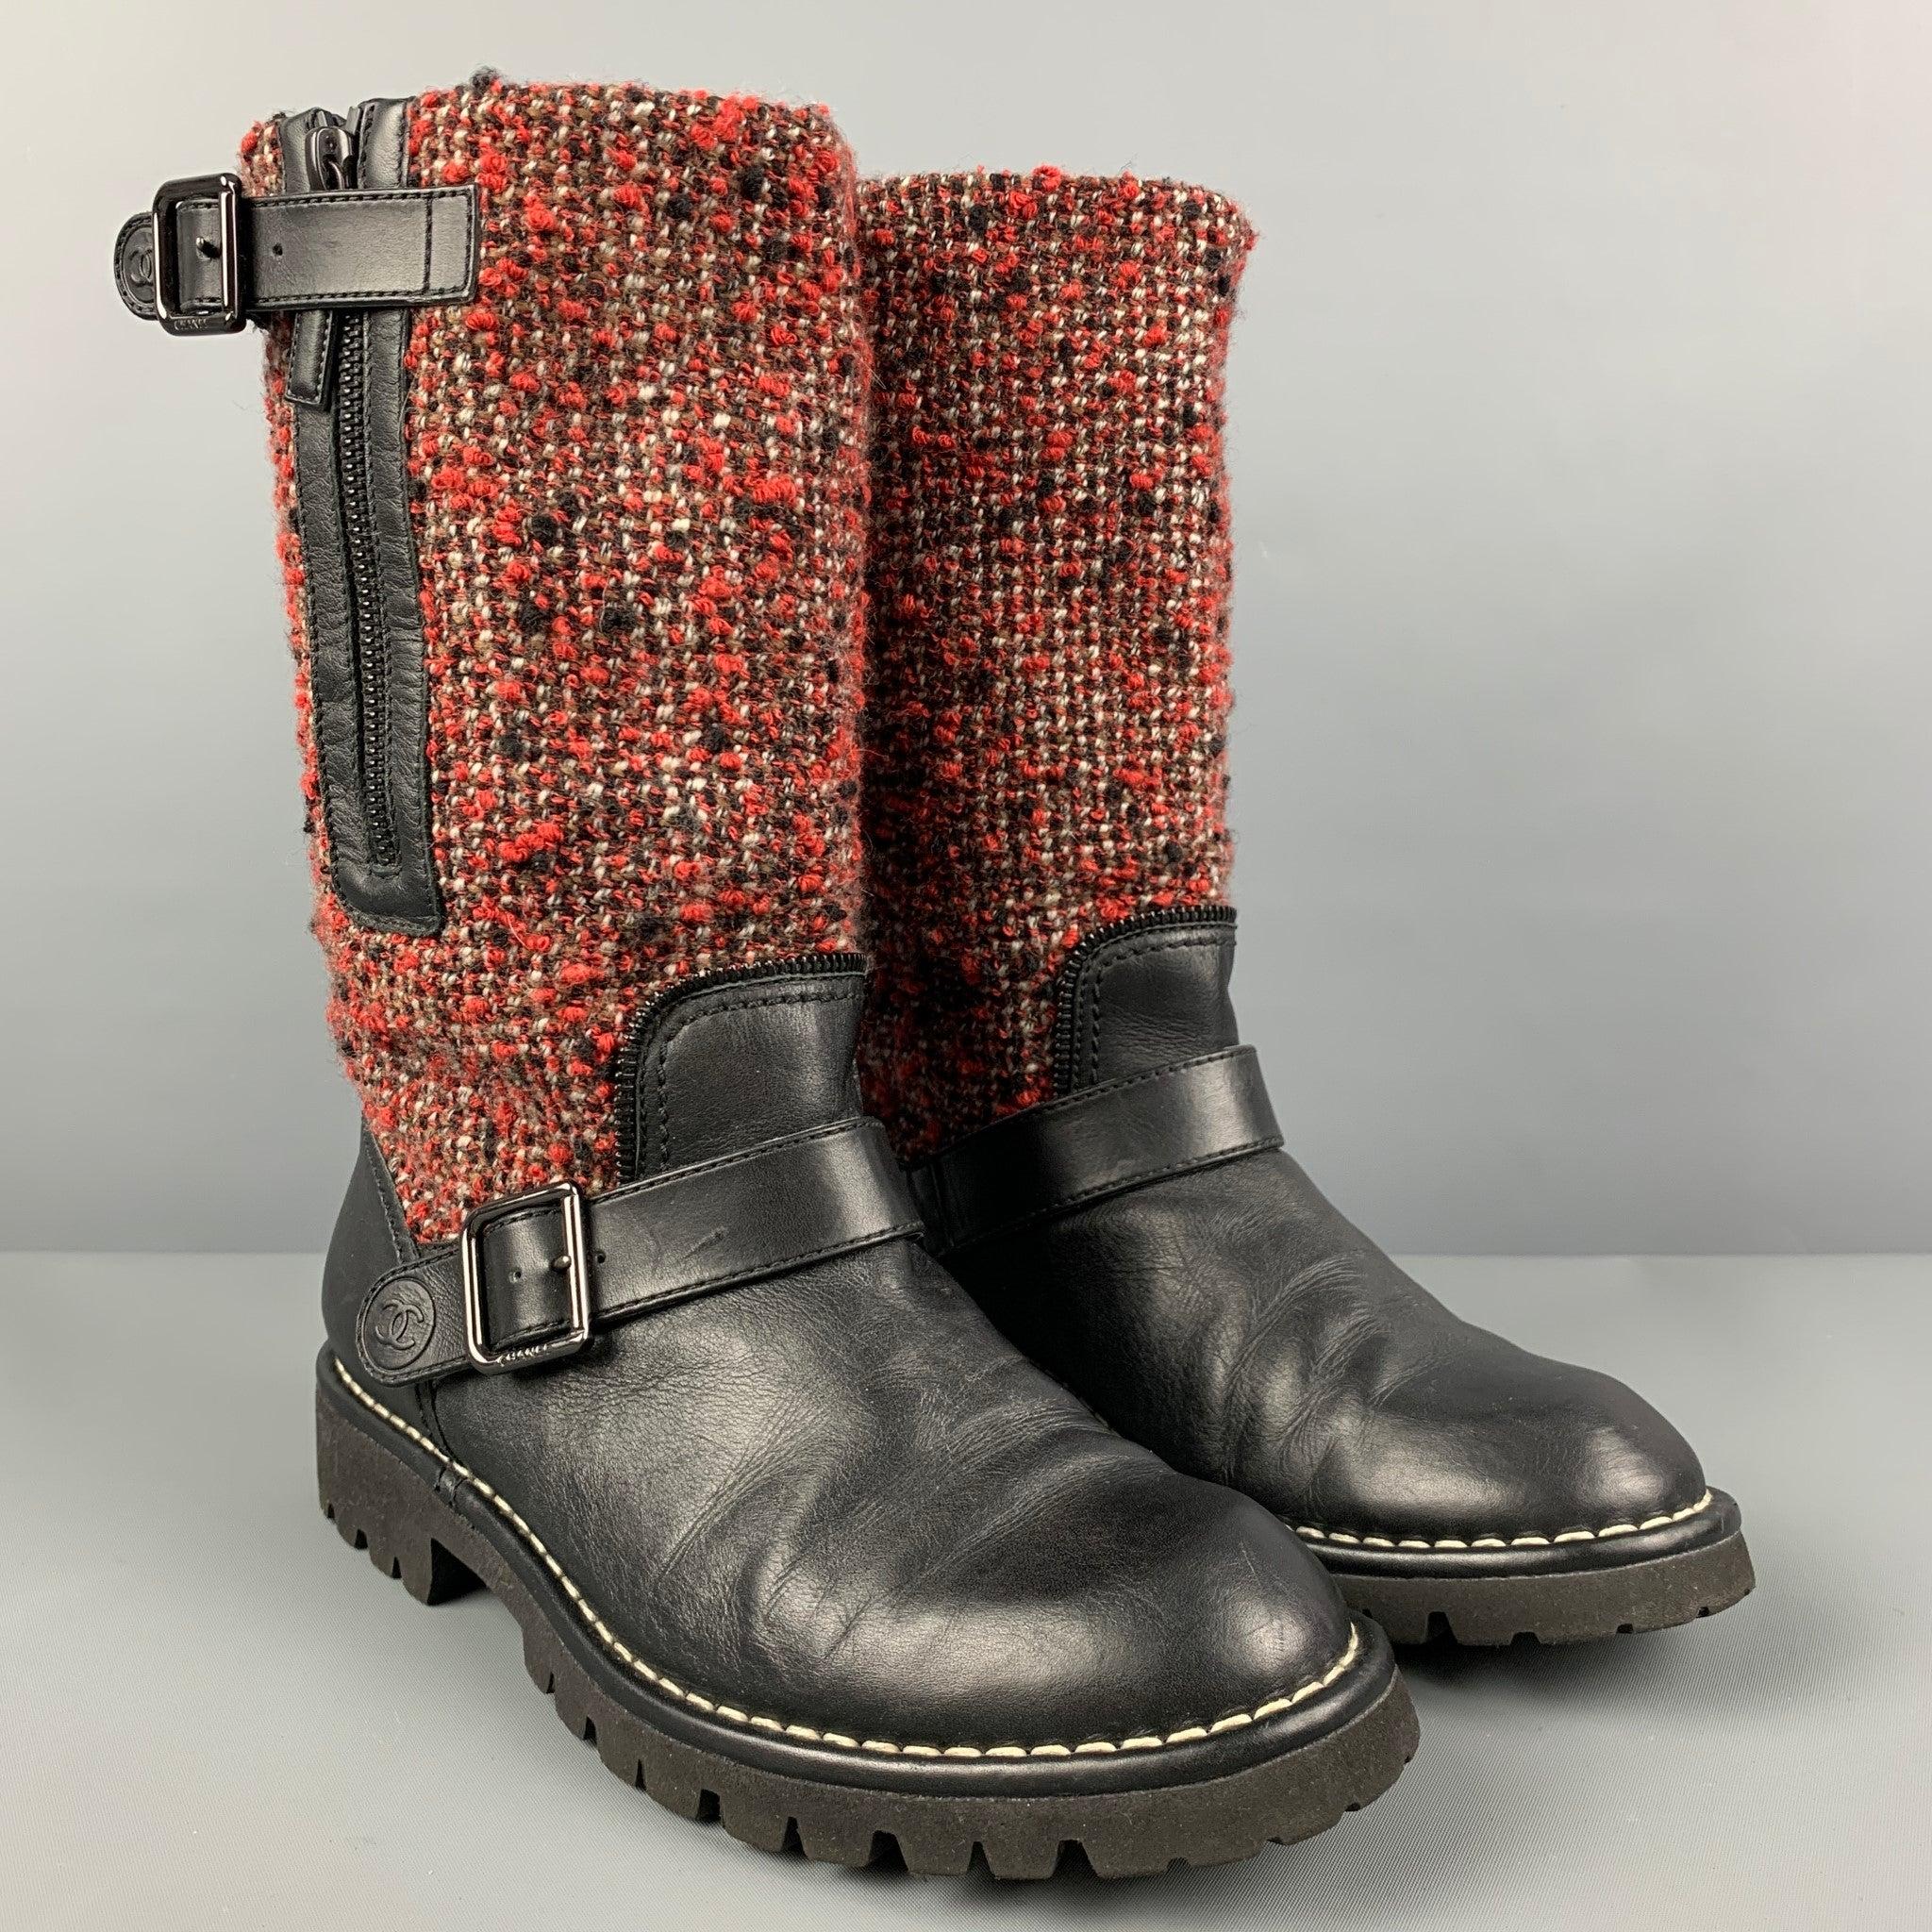 CHANEL boots comes in a black & burgundy mixed materials featuring a tweed panel, logo details, contrast stitching, buckle straps, and a side zipper closure. Made in Italy.
Very Good
Pre-Owned Condition. 

Marked:   IG28566 38 

Measurements: 
 